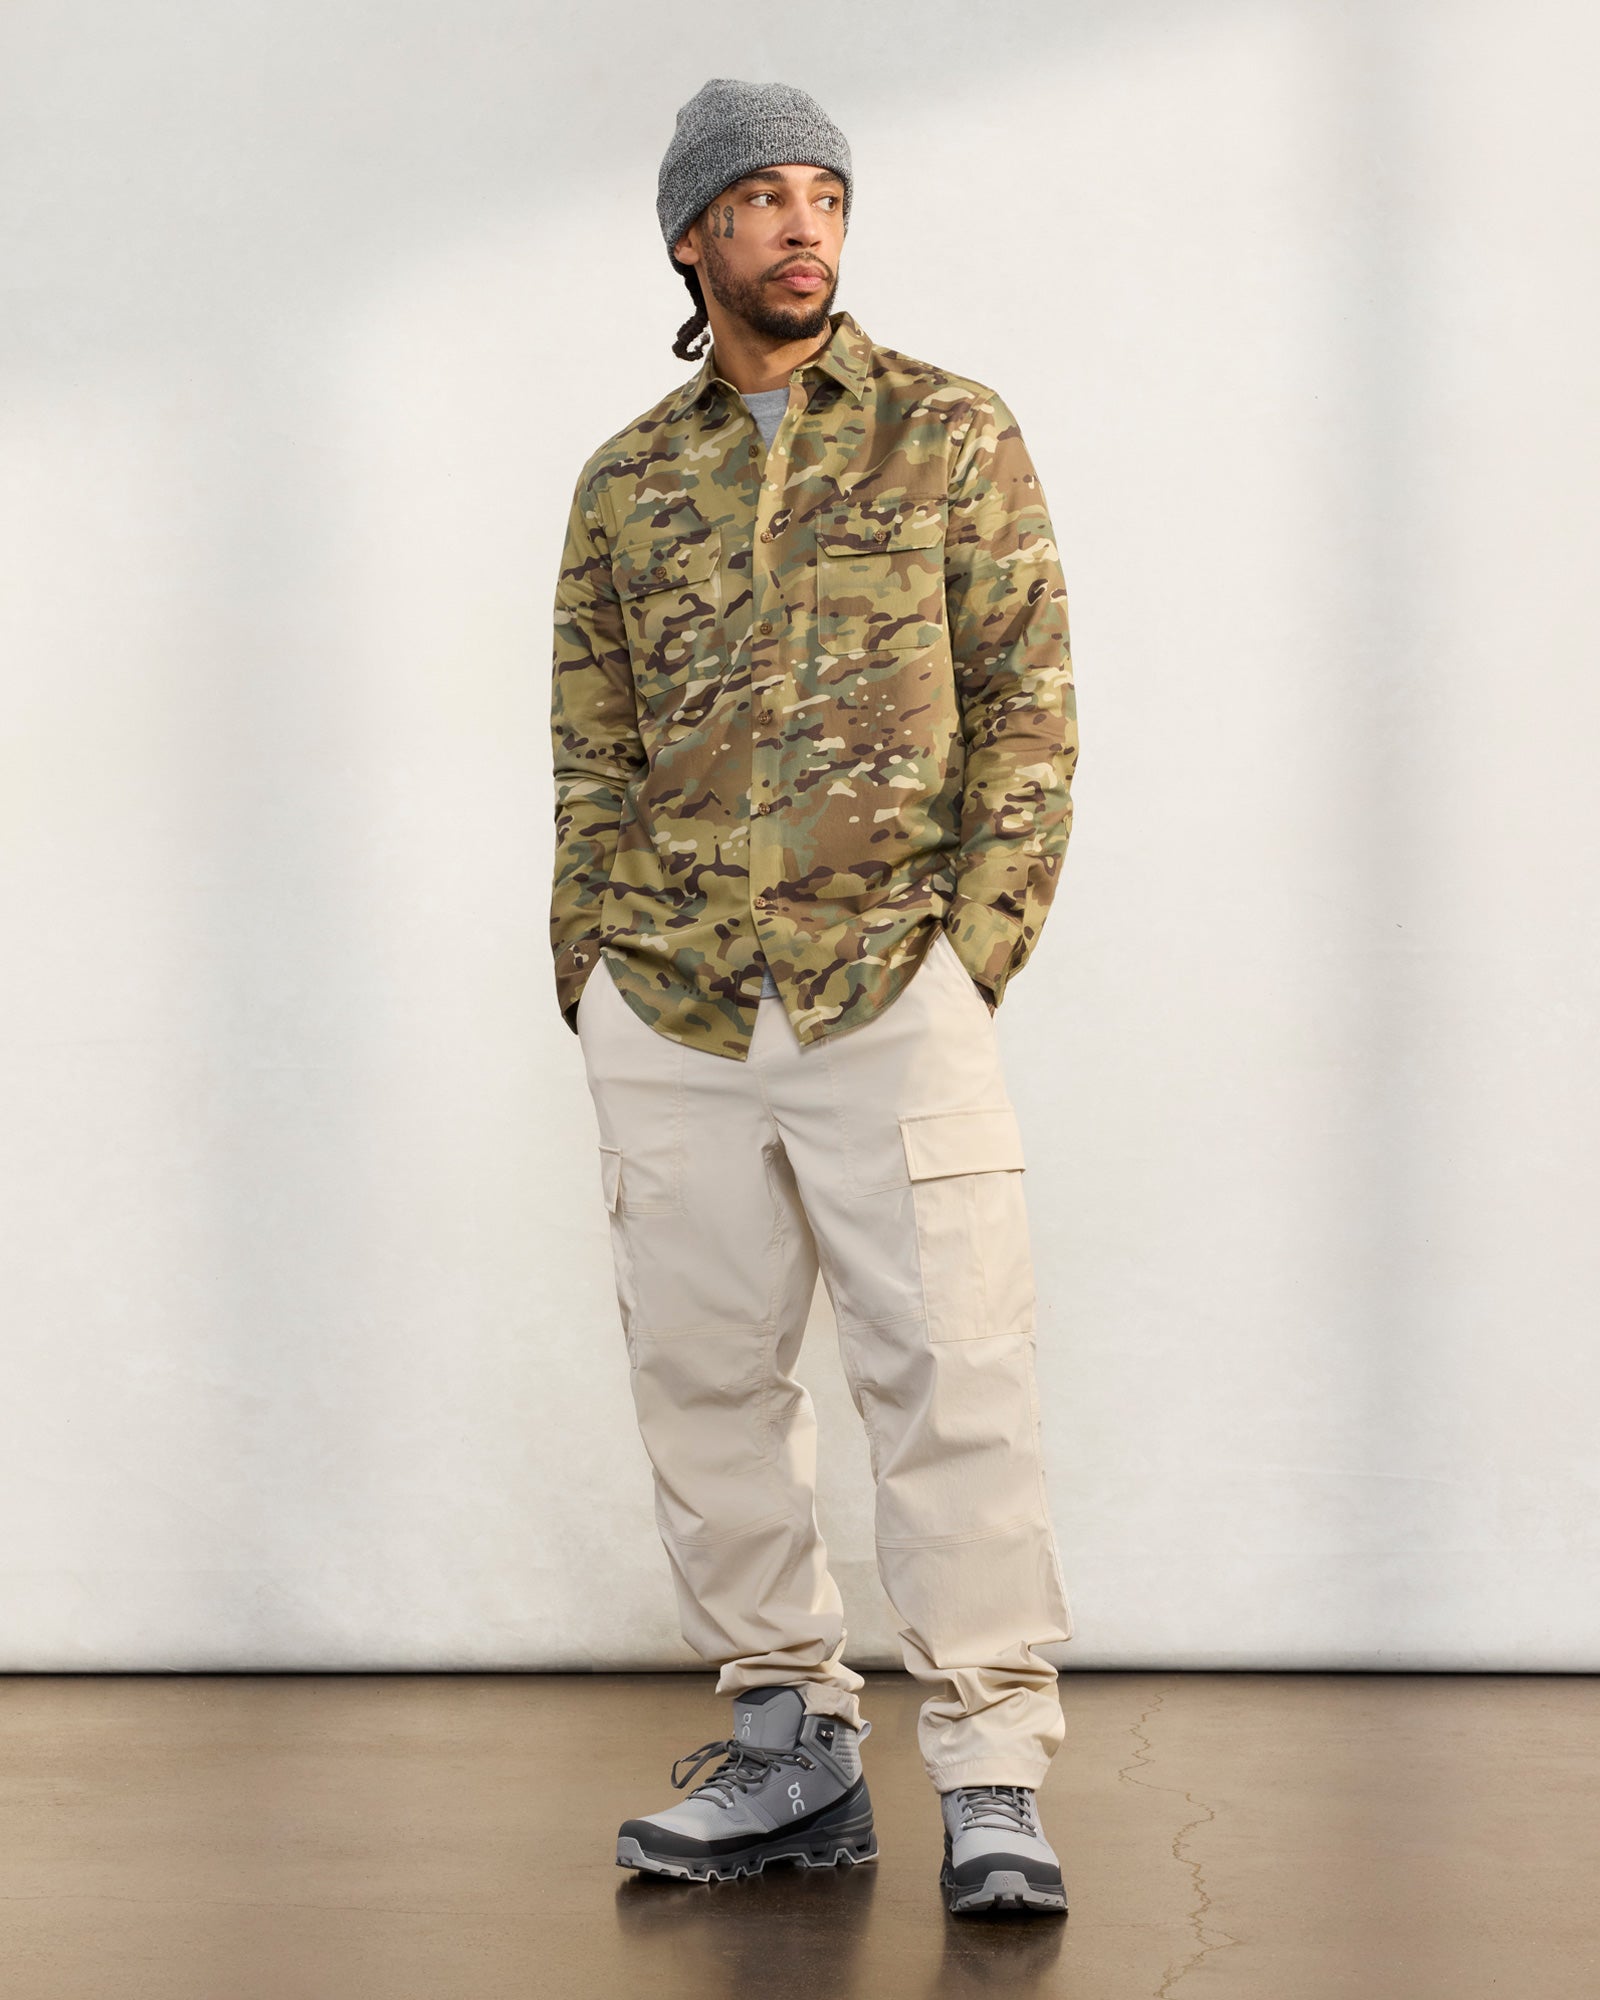 Belted Utility Cargo Pant - Sand